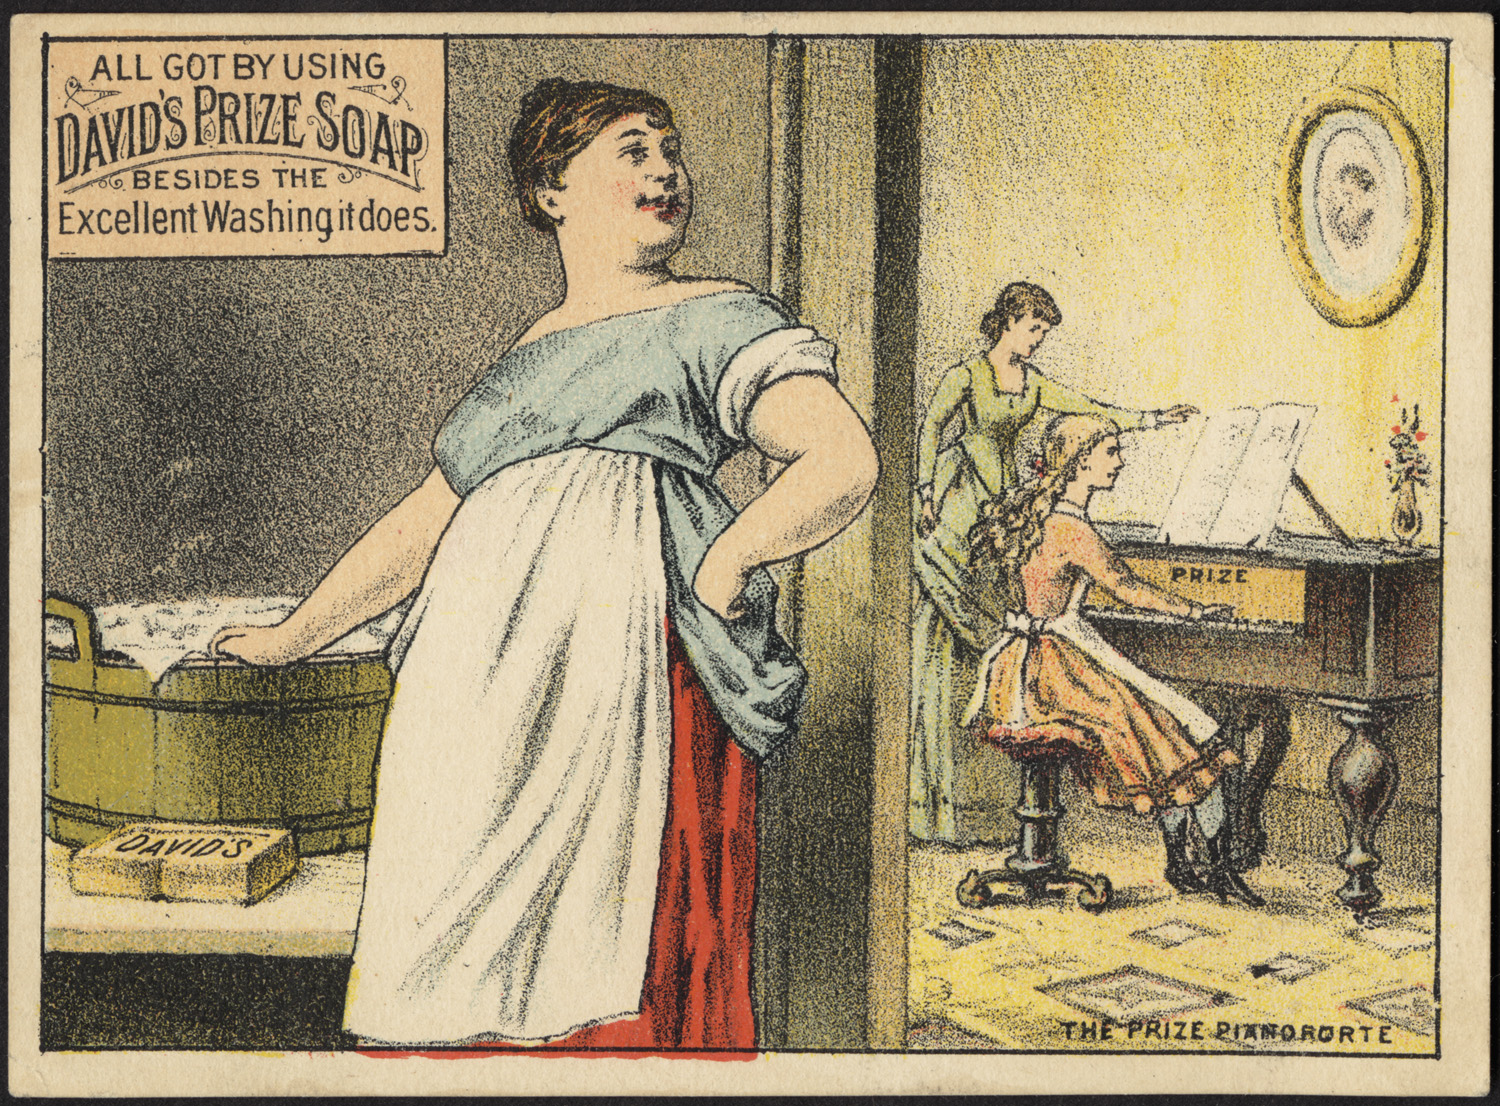 an old fashioned cartoon showing a woman in dress looking in the mirror